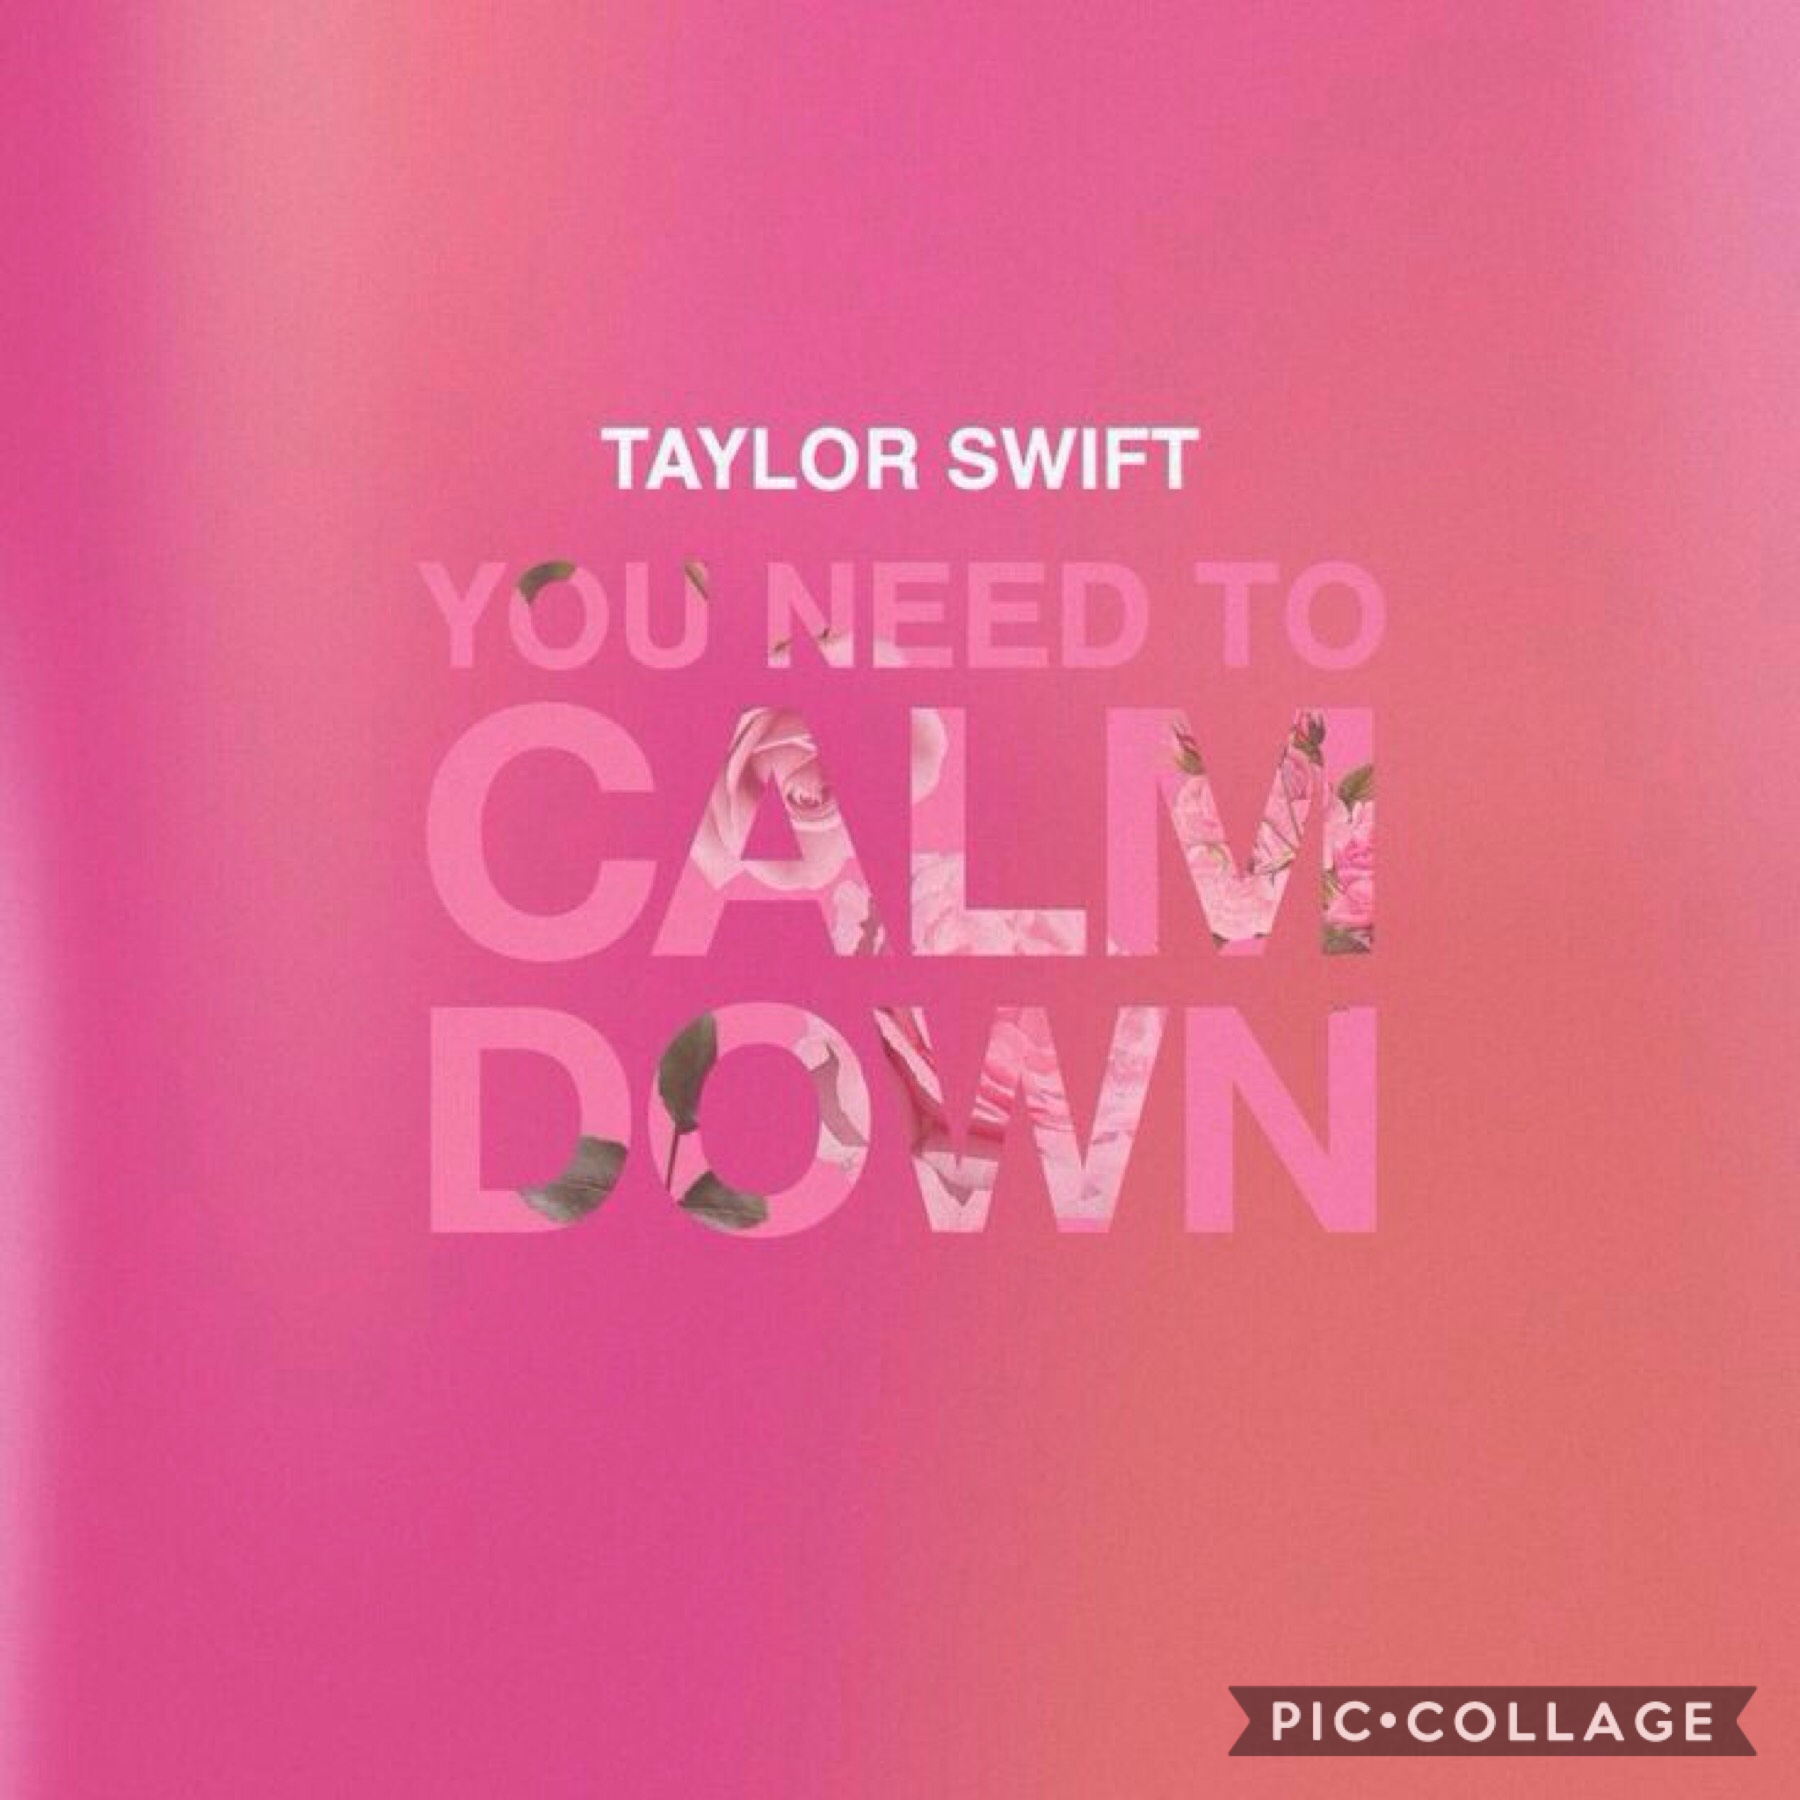 I know I said I would post every 50 likes but..
I'm so excited for this song, If you don't know Taylor announced her album Lover will be released Aud 23 and this single @midnight. What are your thoughts? 